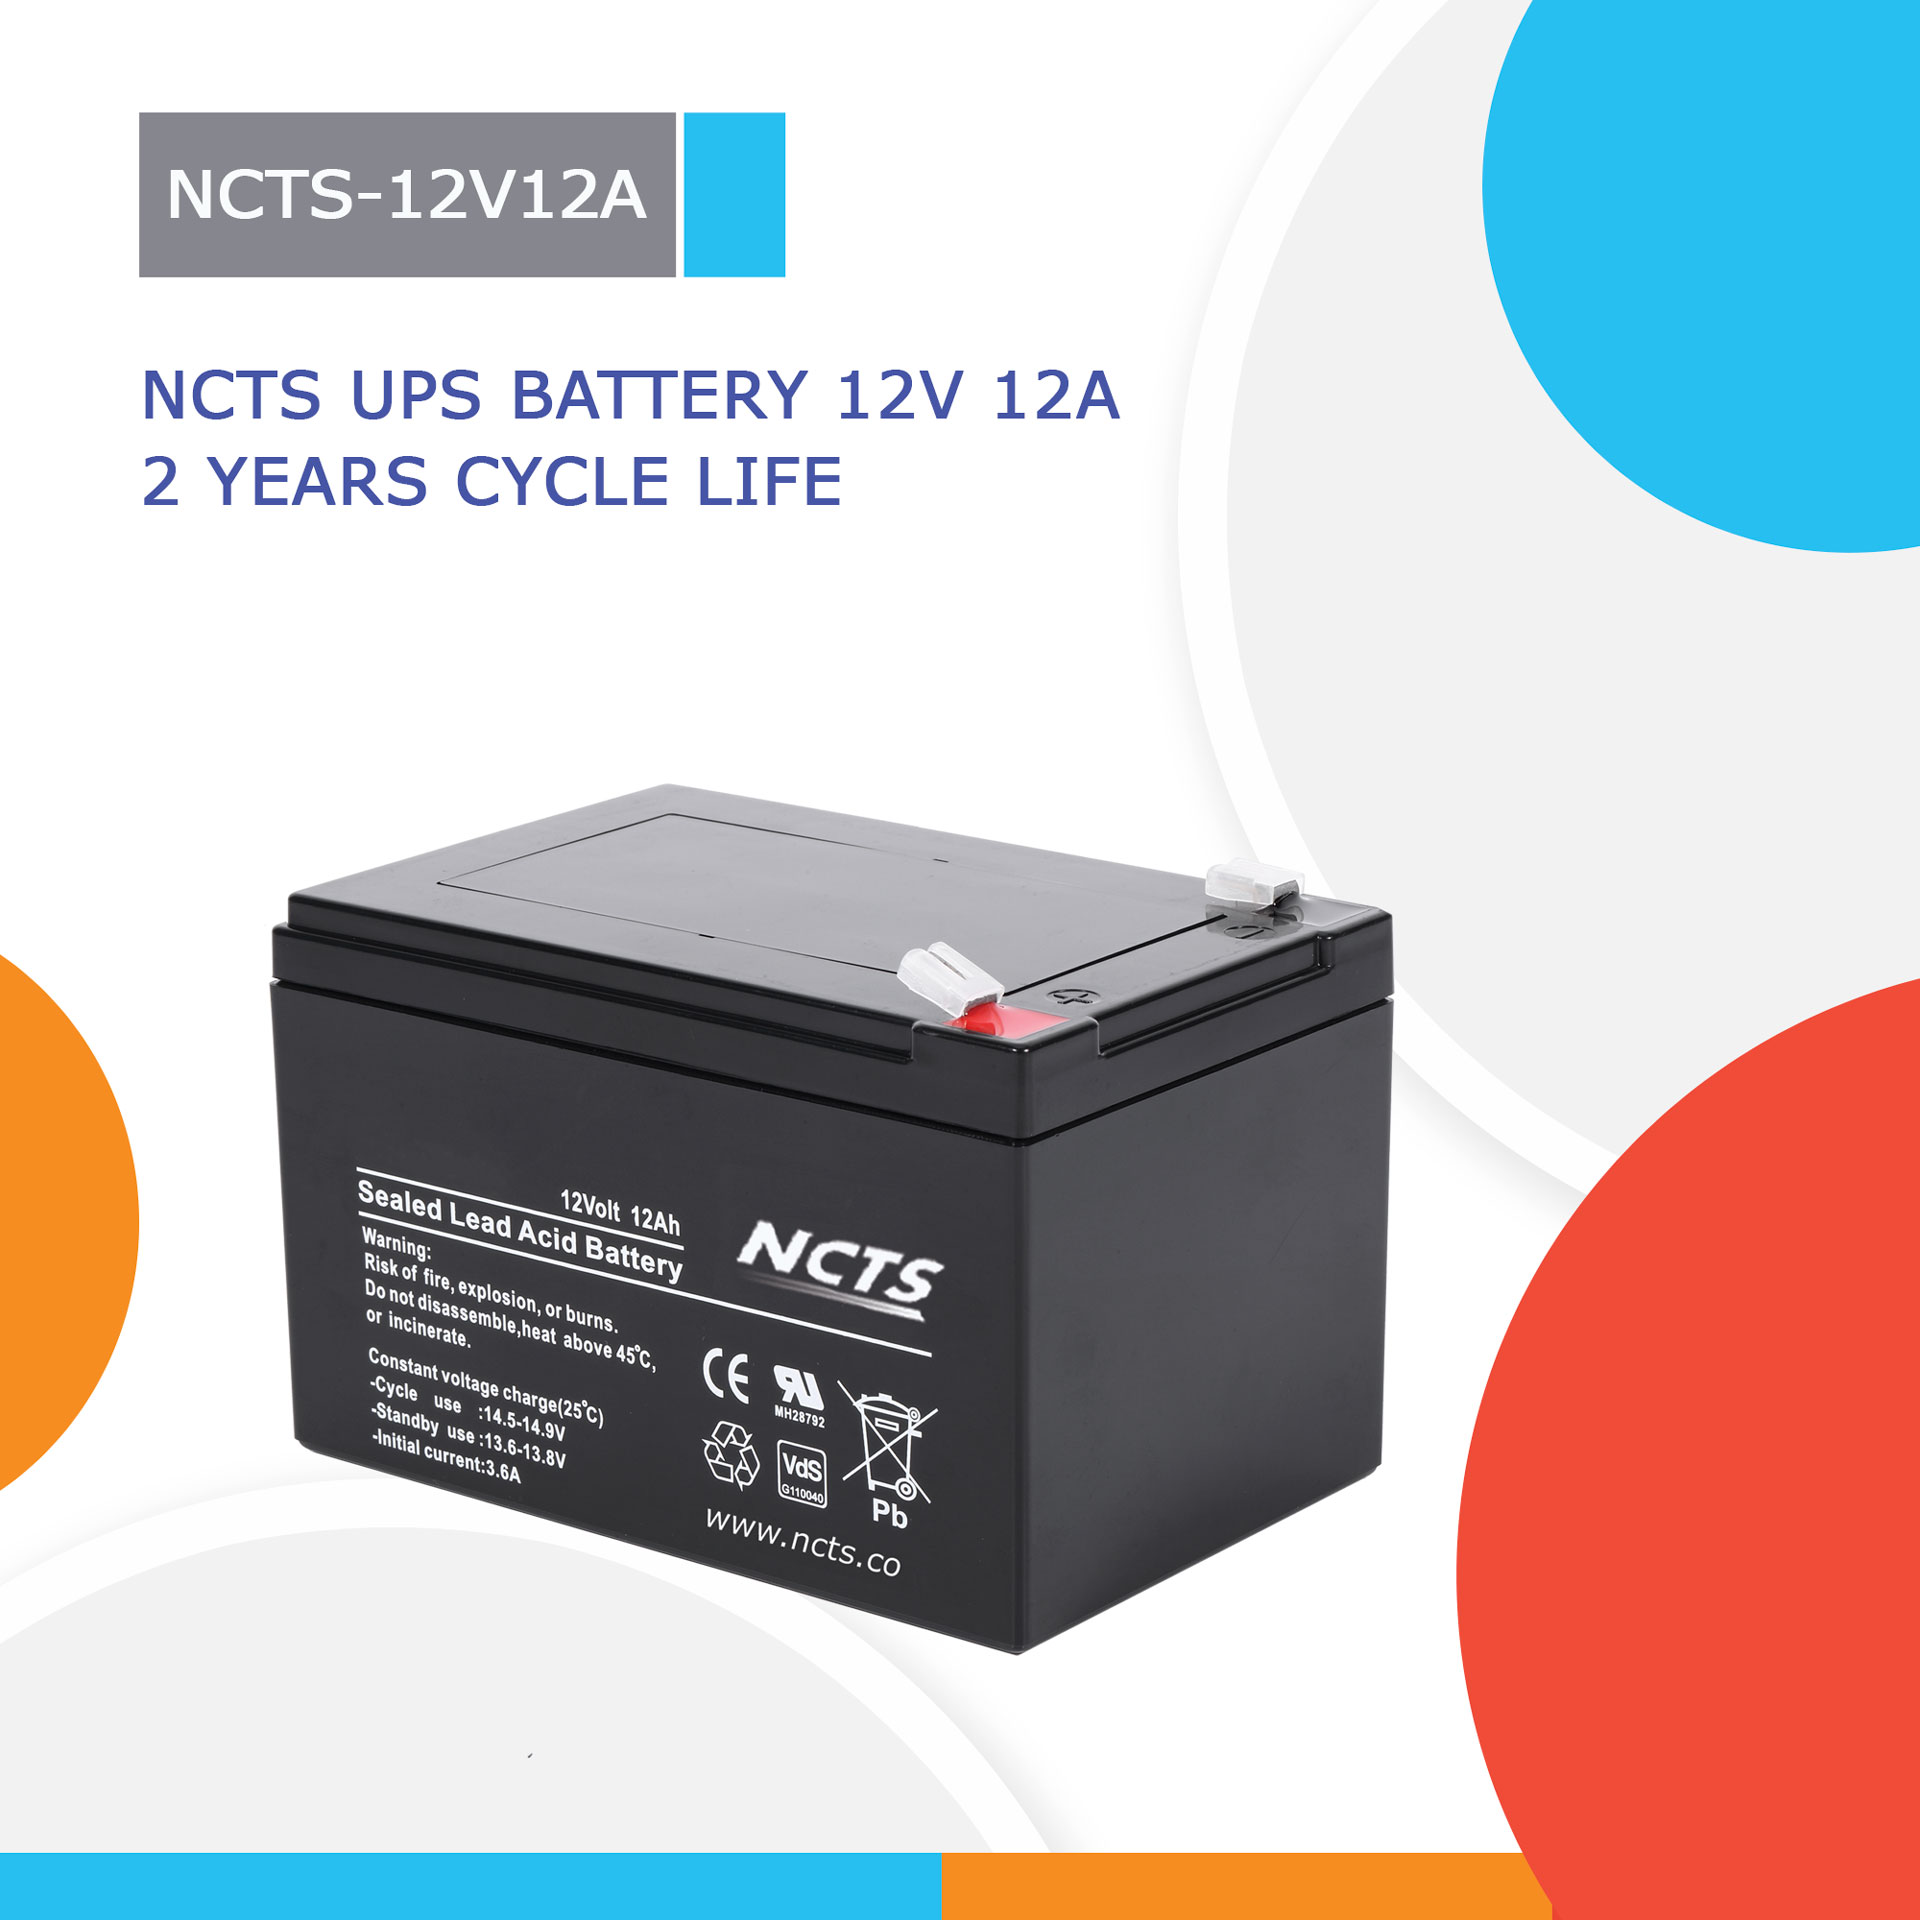 NCTS-12V12A